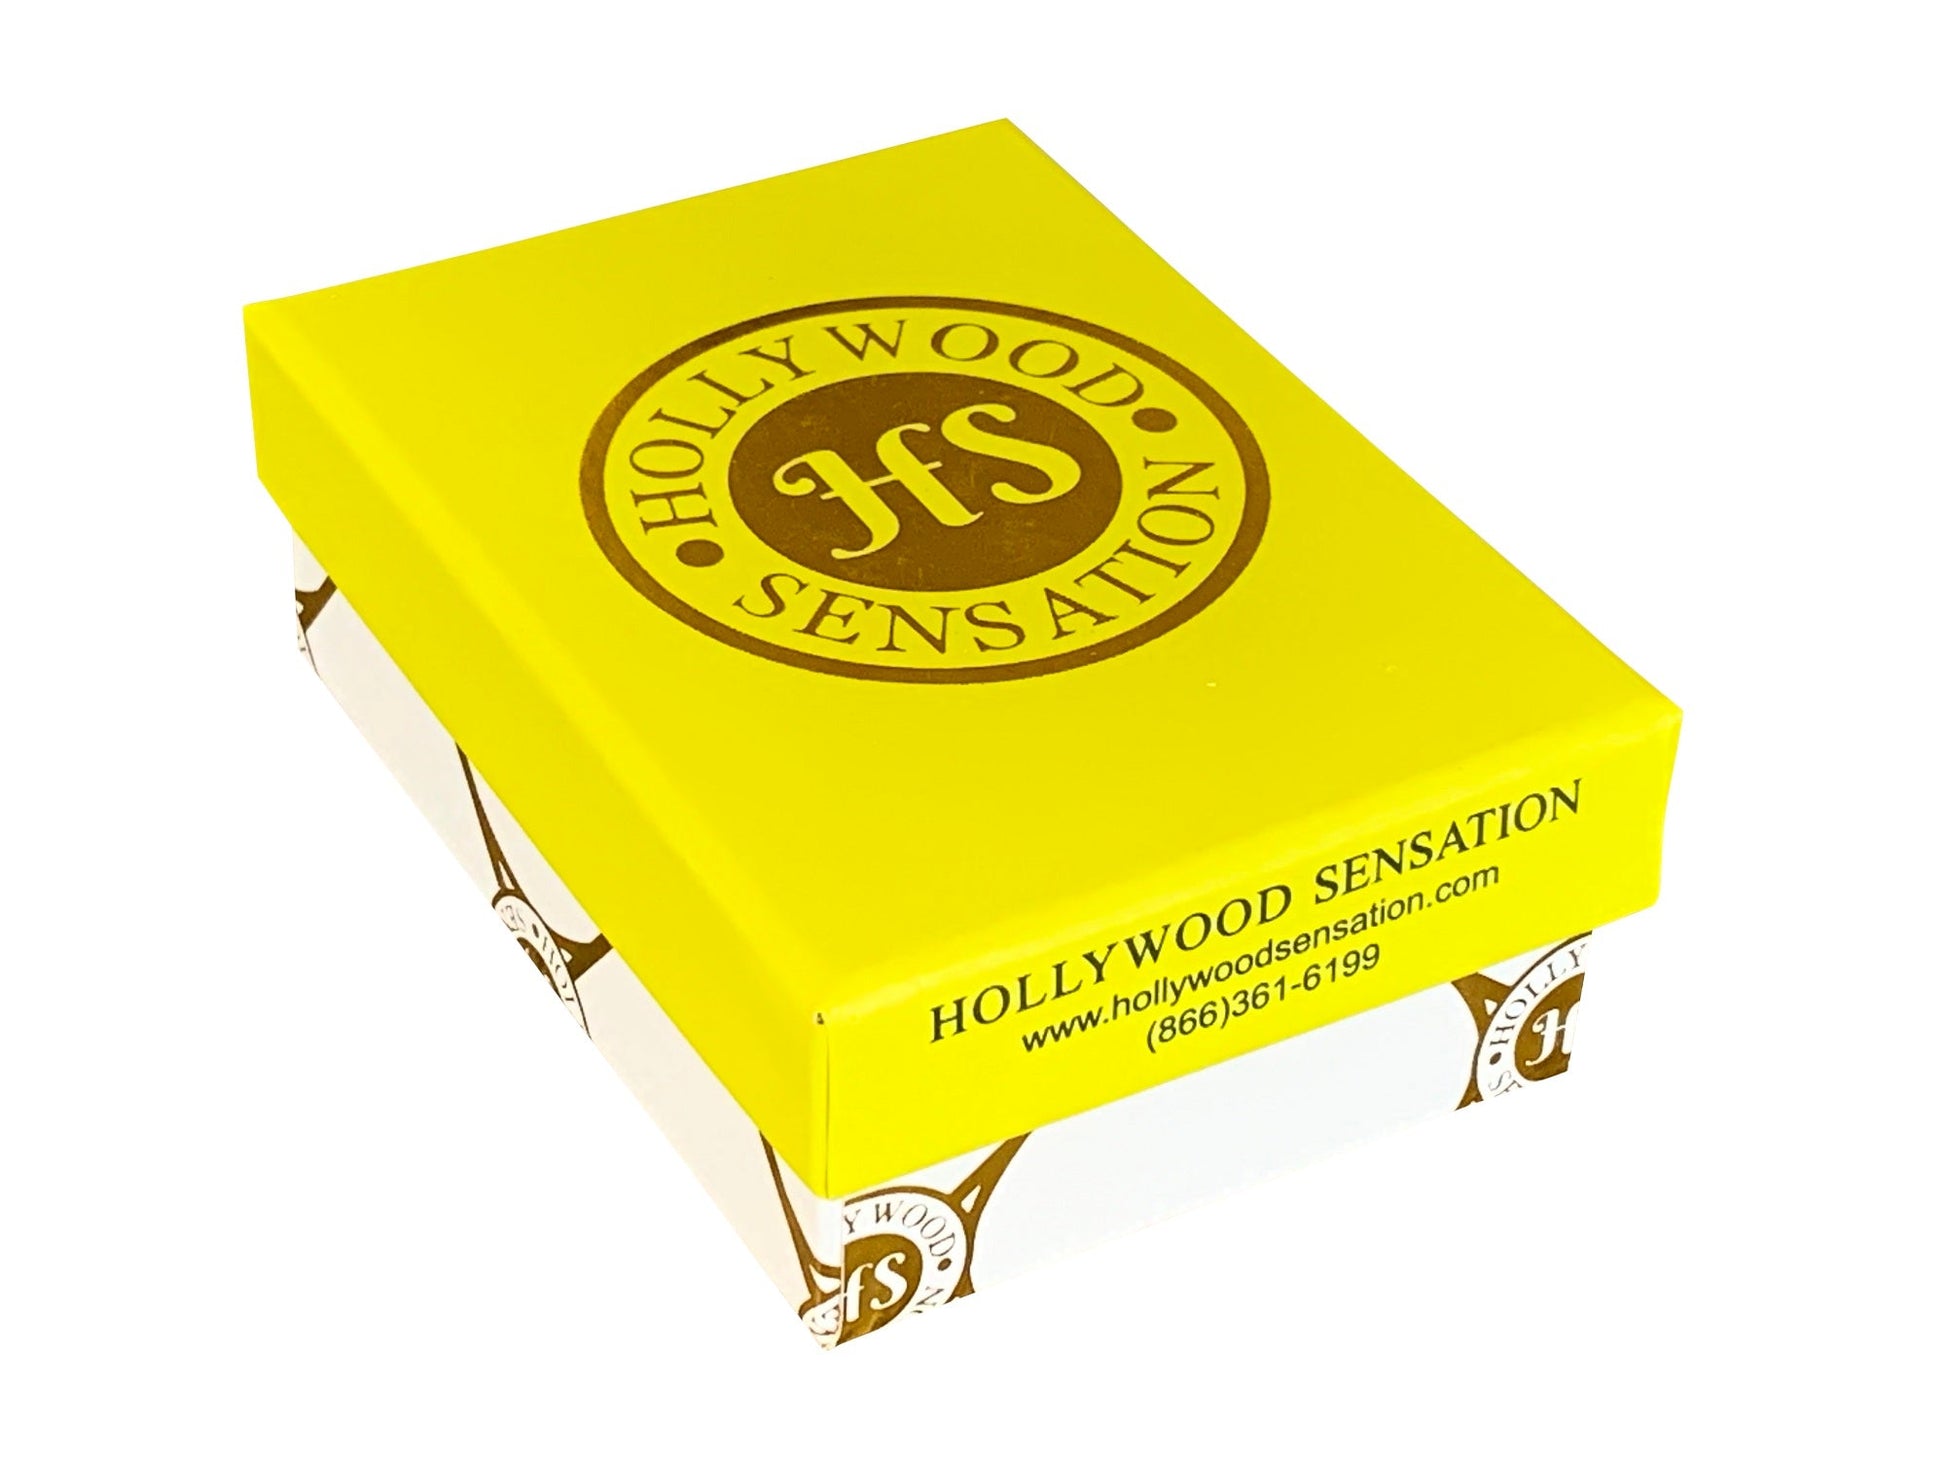 Hammered Gold Circle Stud Earrings for Women - Hollywood Sensation®